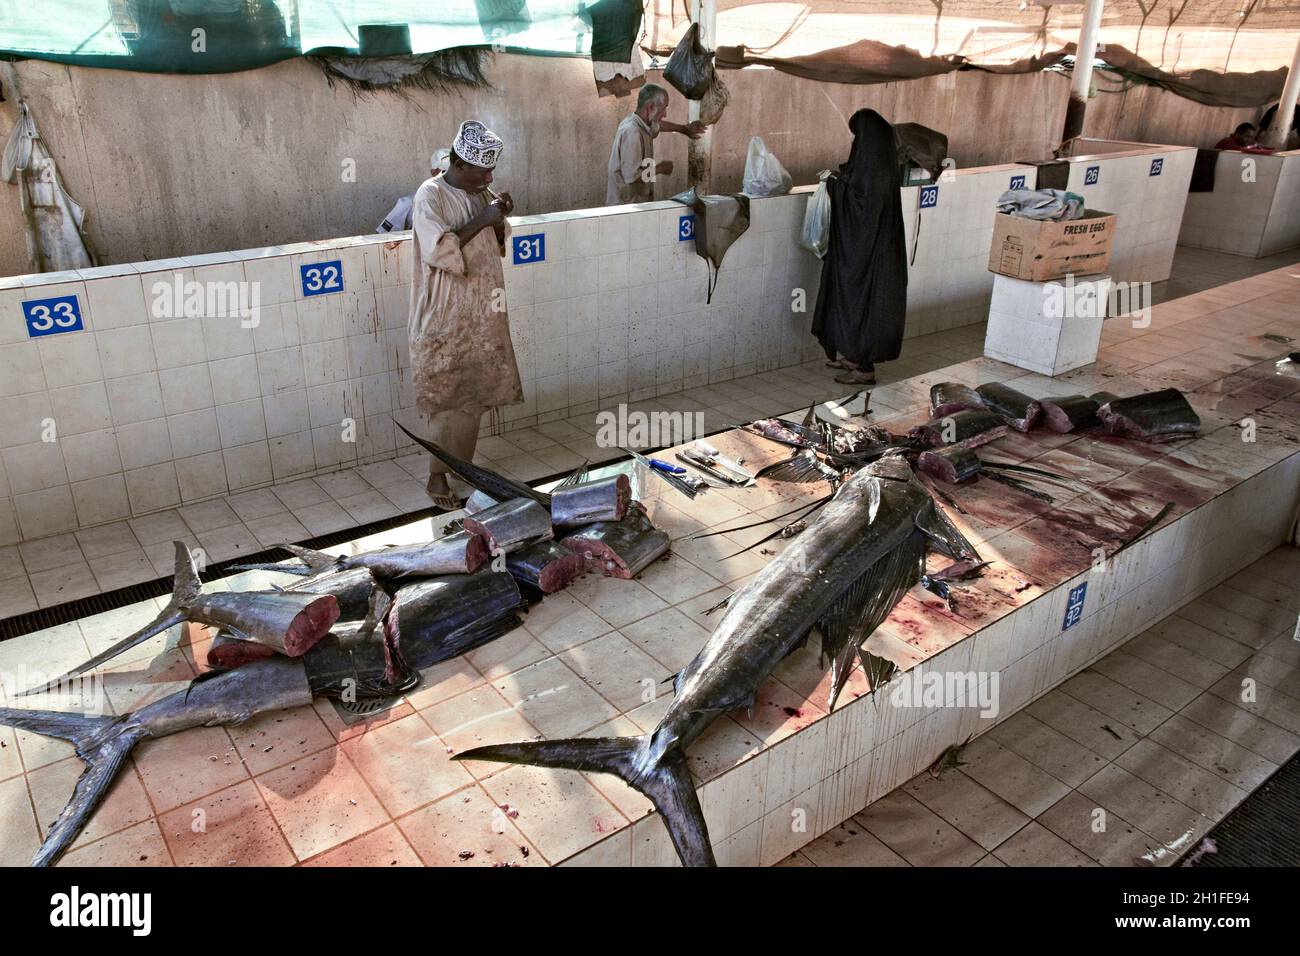 Muscat, Oman. fish market at Muttrah, town center of Muscat, Oman. Several tuna and other fish on stalls. Stock Photo